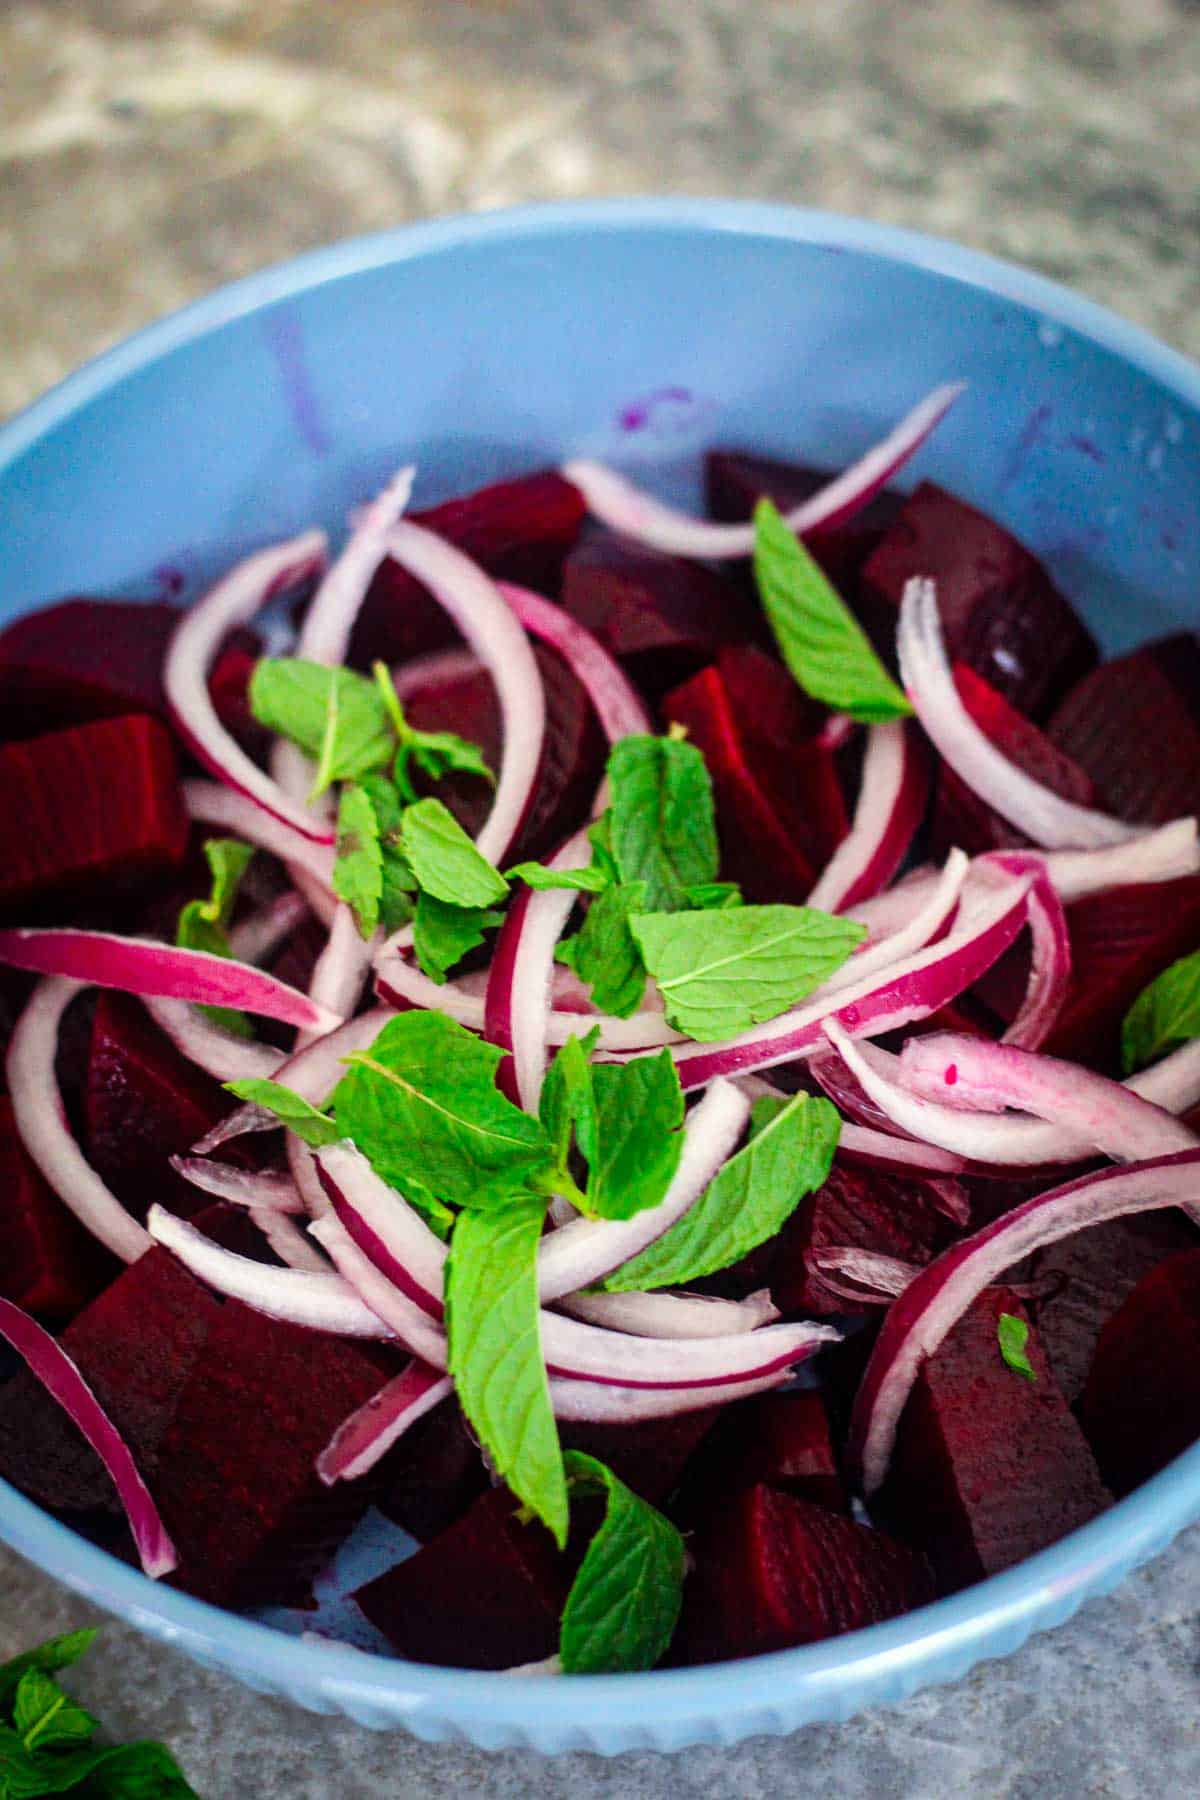 Beets with onions and mint, no vinaigrette is added yet.